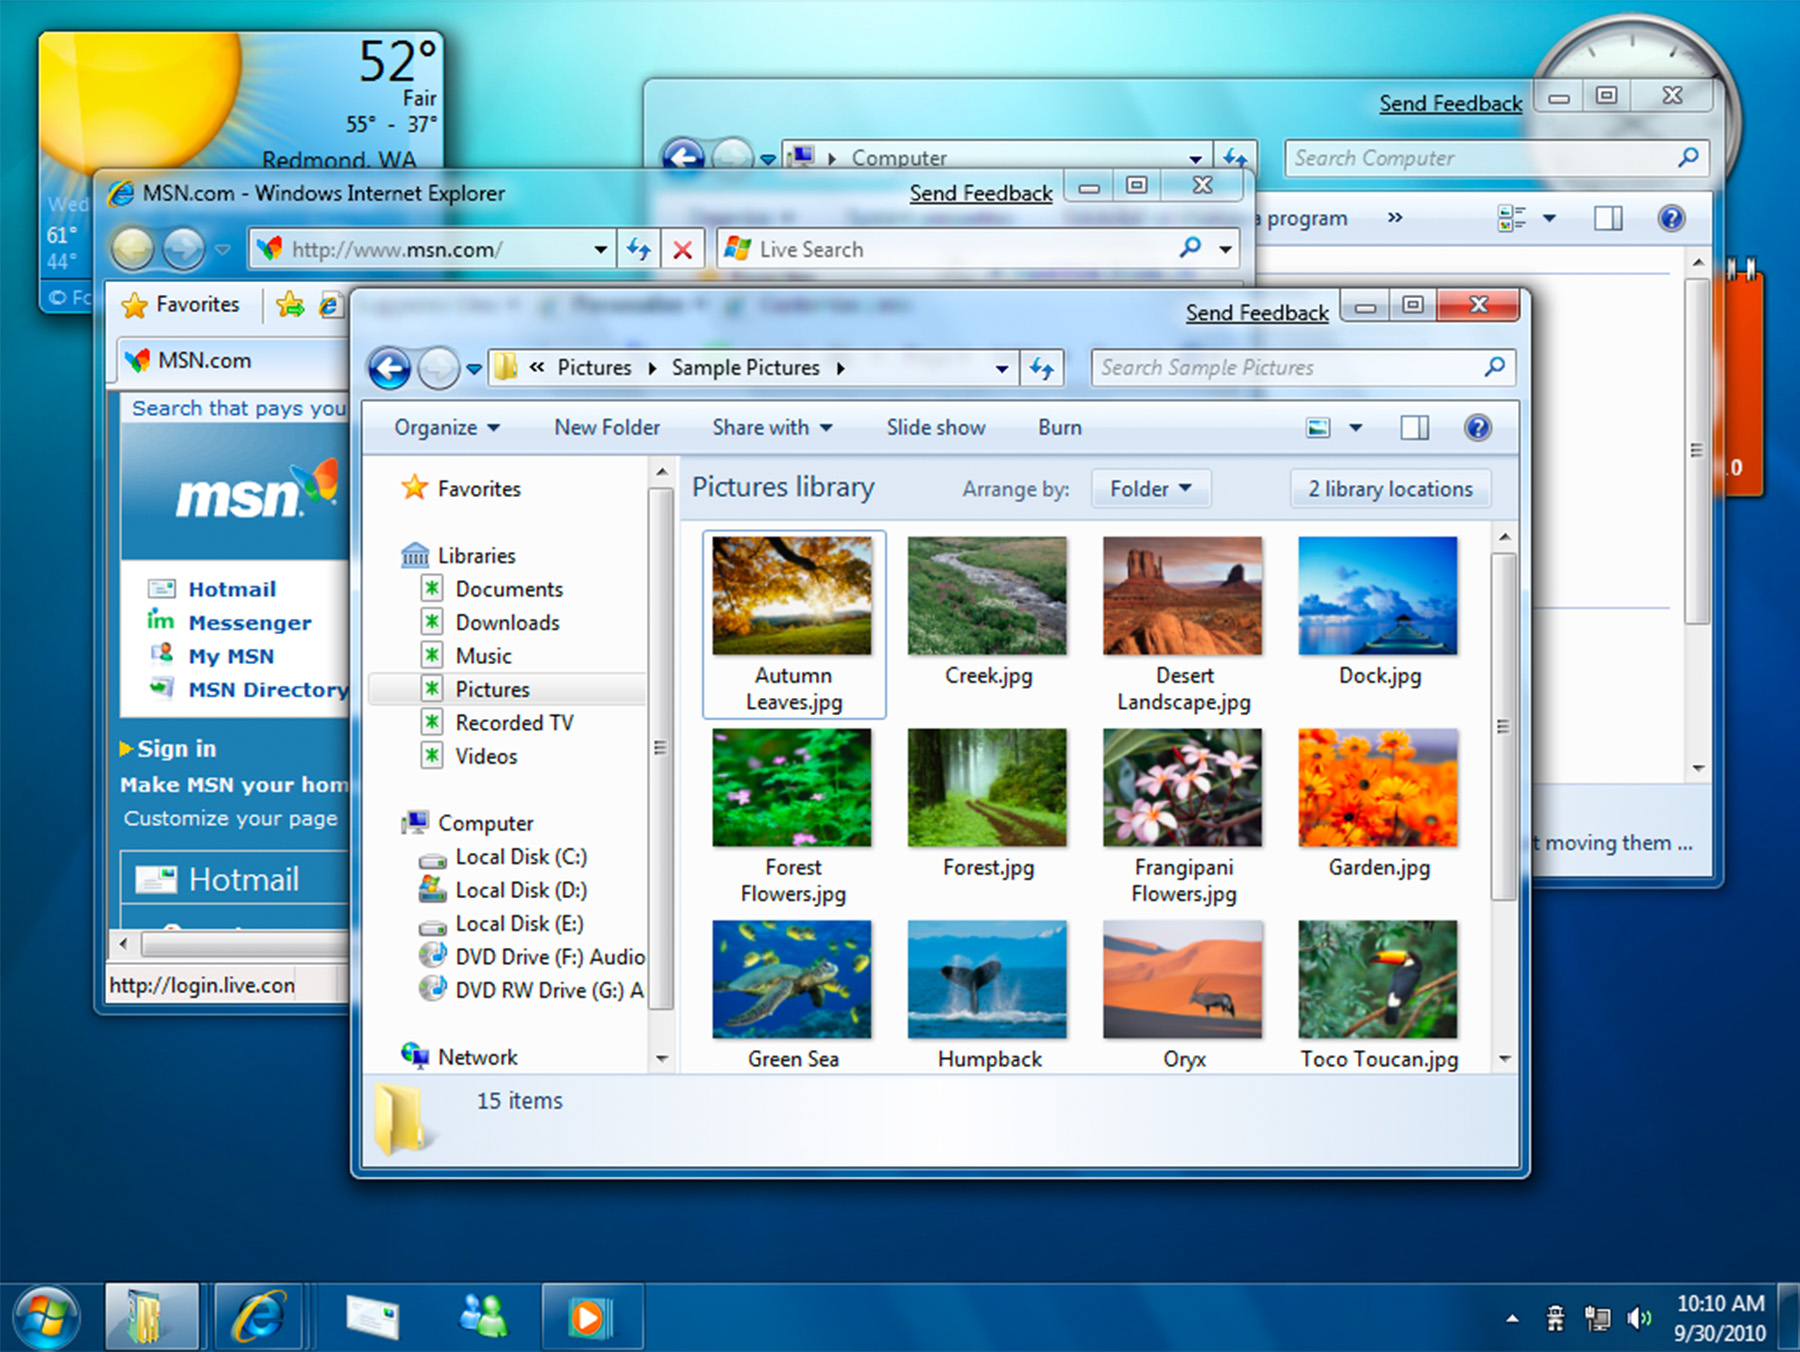 First look at Windows 7’s User Interface